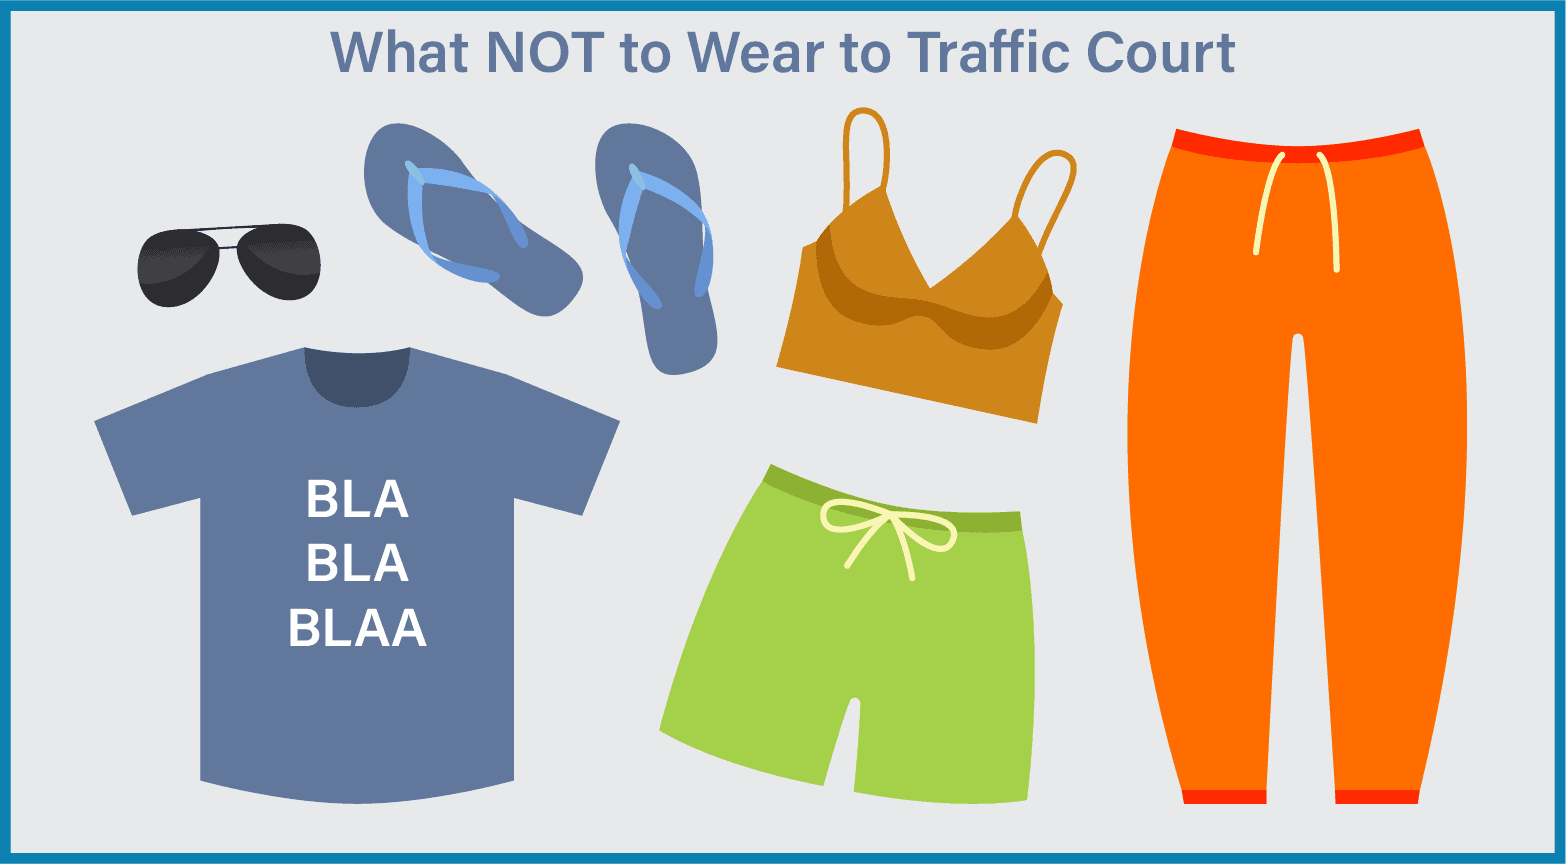 What Not to Wear to Traffic Court